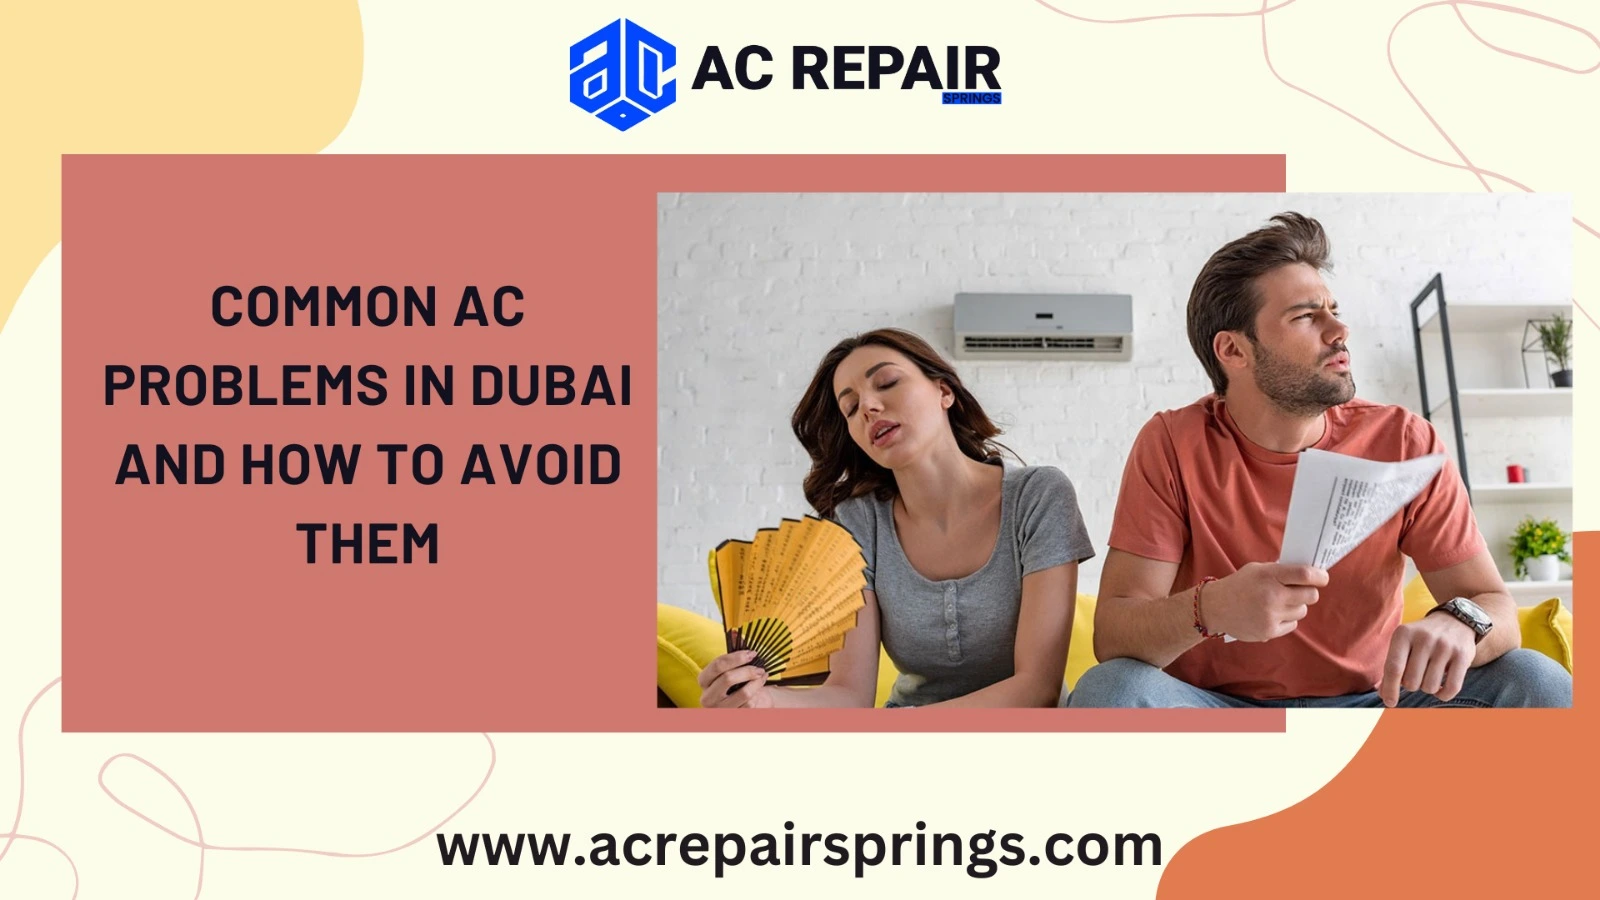 Common AC problems in Dubai and how to avoid them